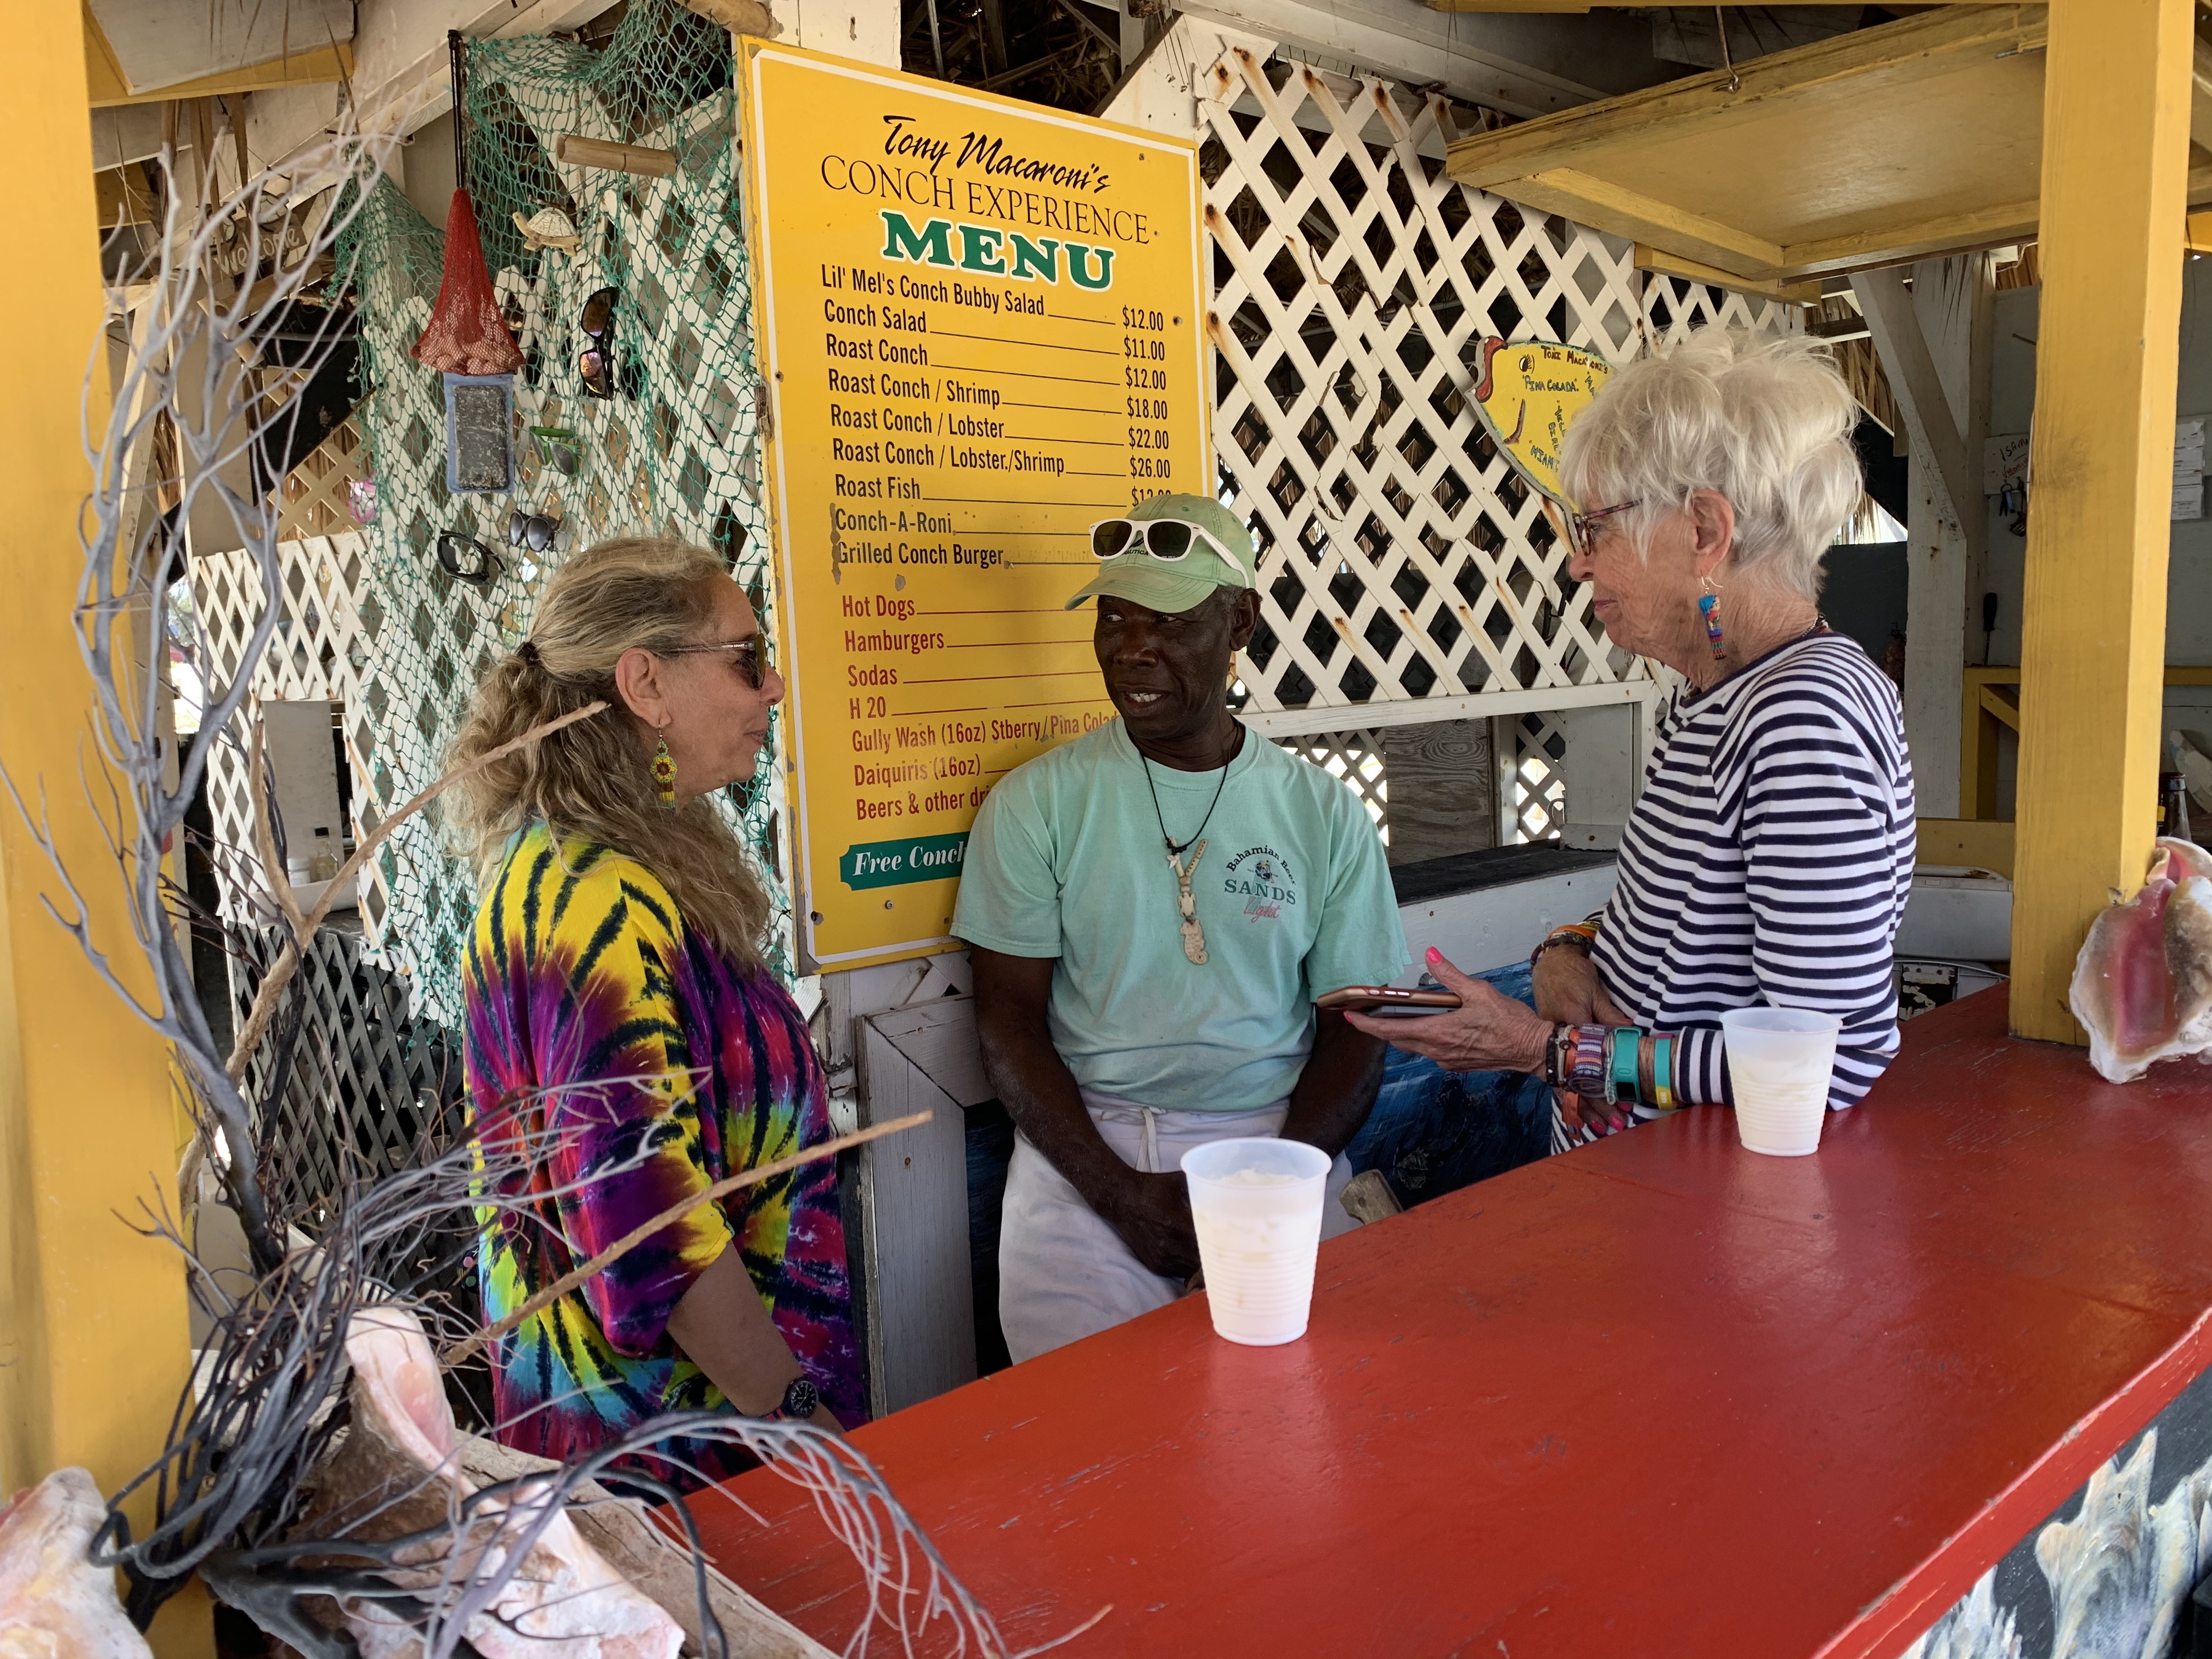 Caribbean travel writers Melanie Reffes (L) and Gay Nagle Myers (R) visit Anthony Hanna, proprietor of Tony Macaroni’s Conch Experience, for lunch during a familiarization tour of Grand Bahama.